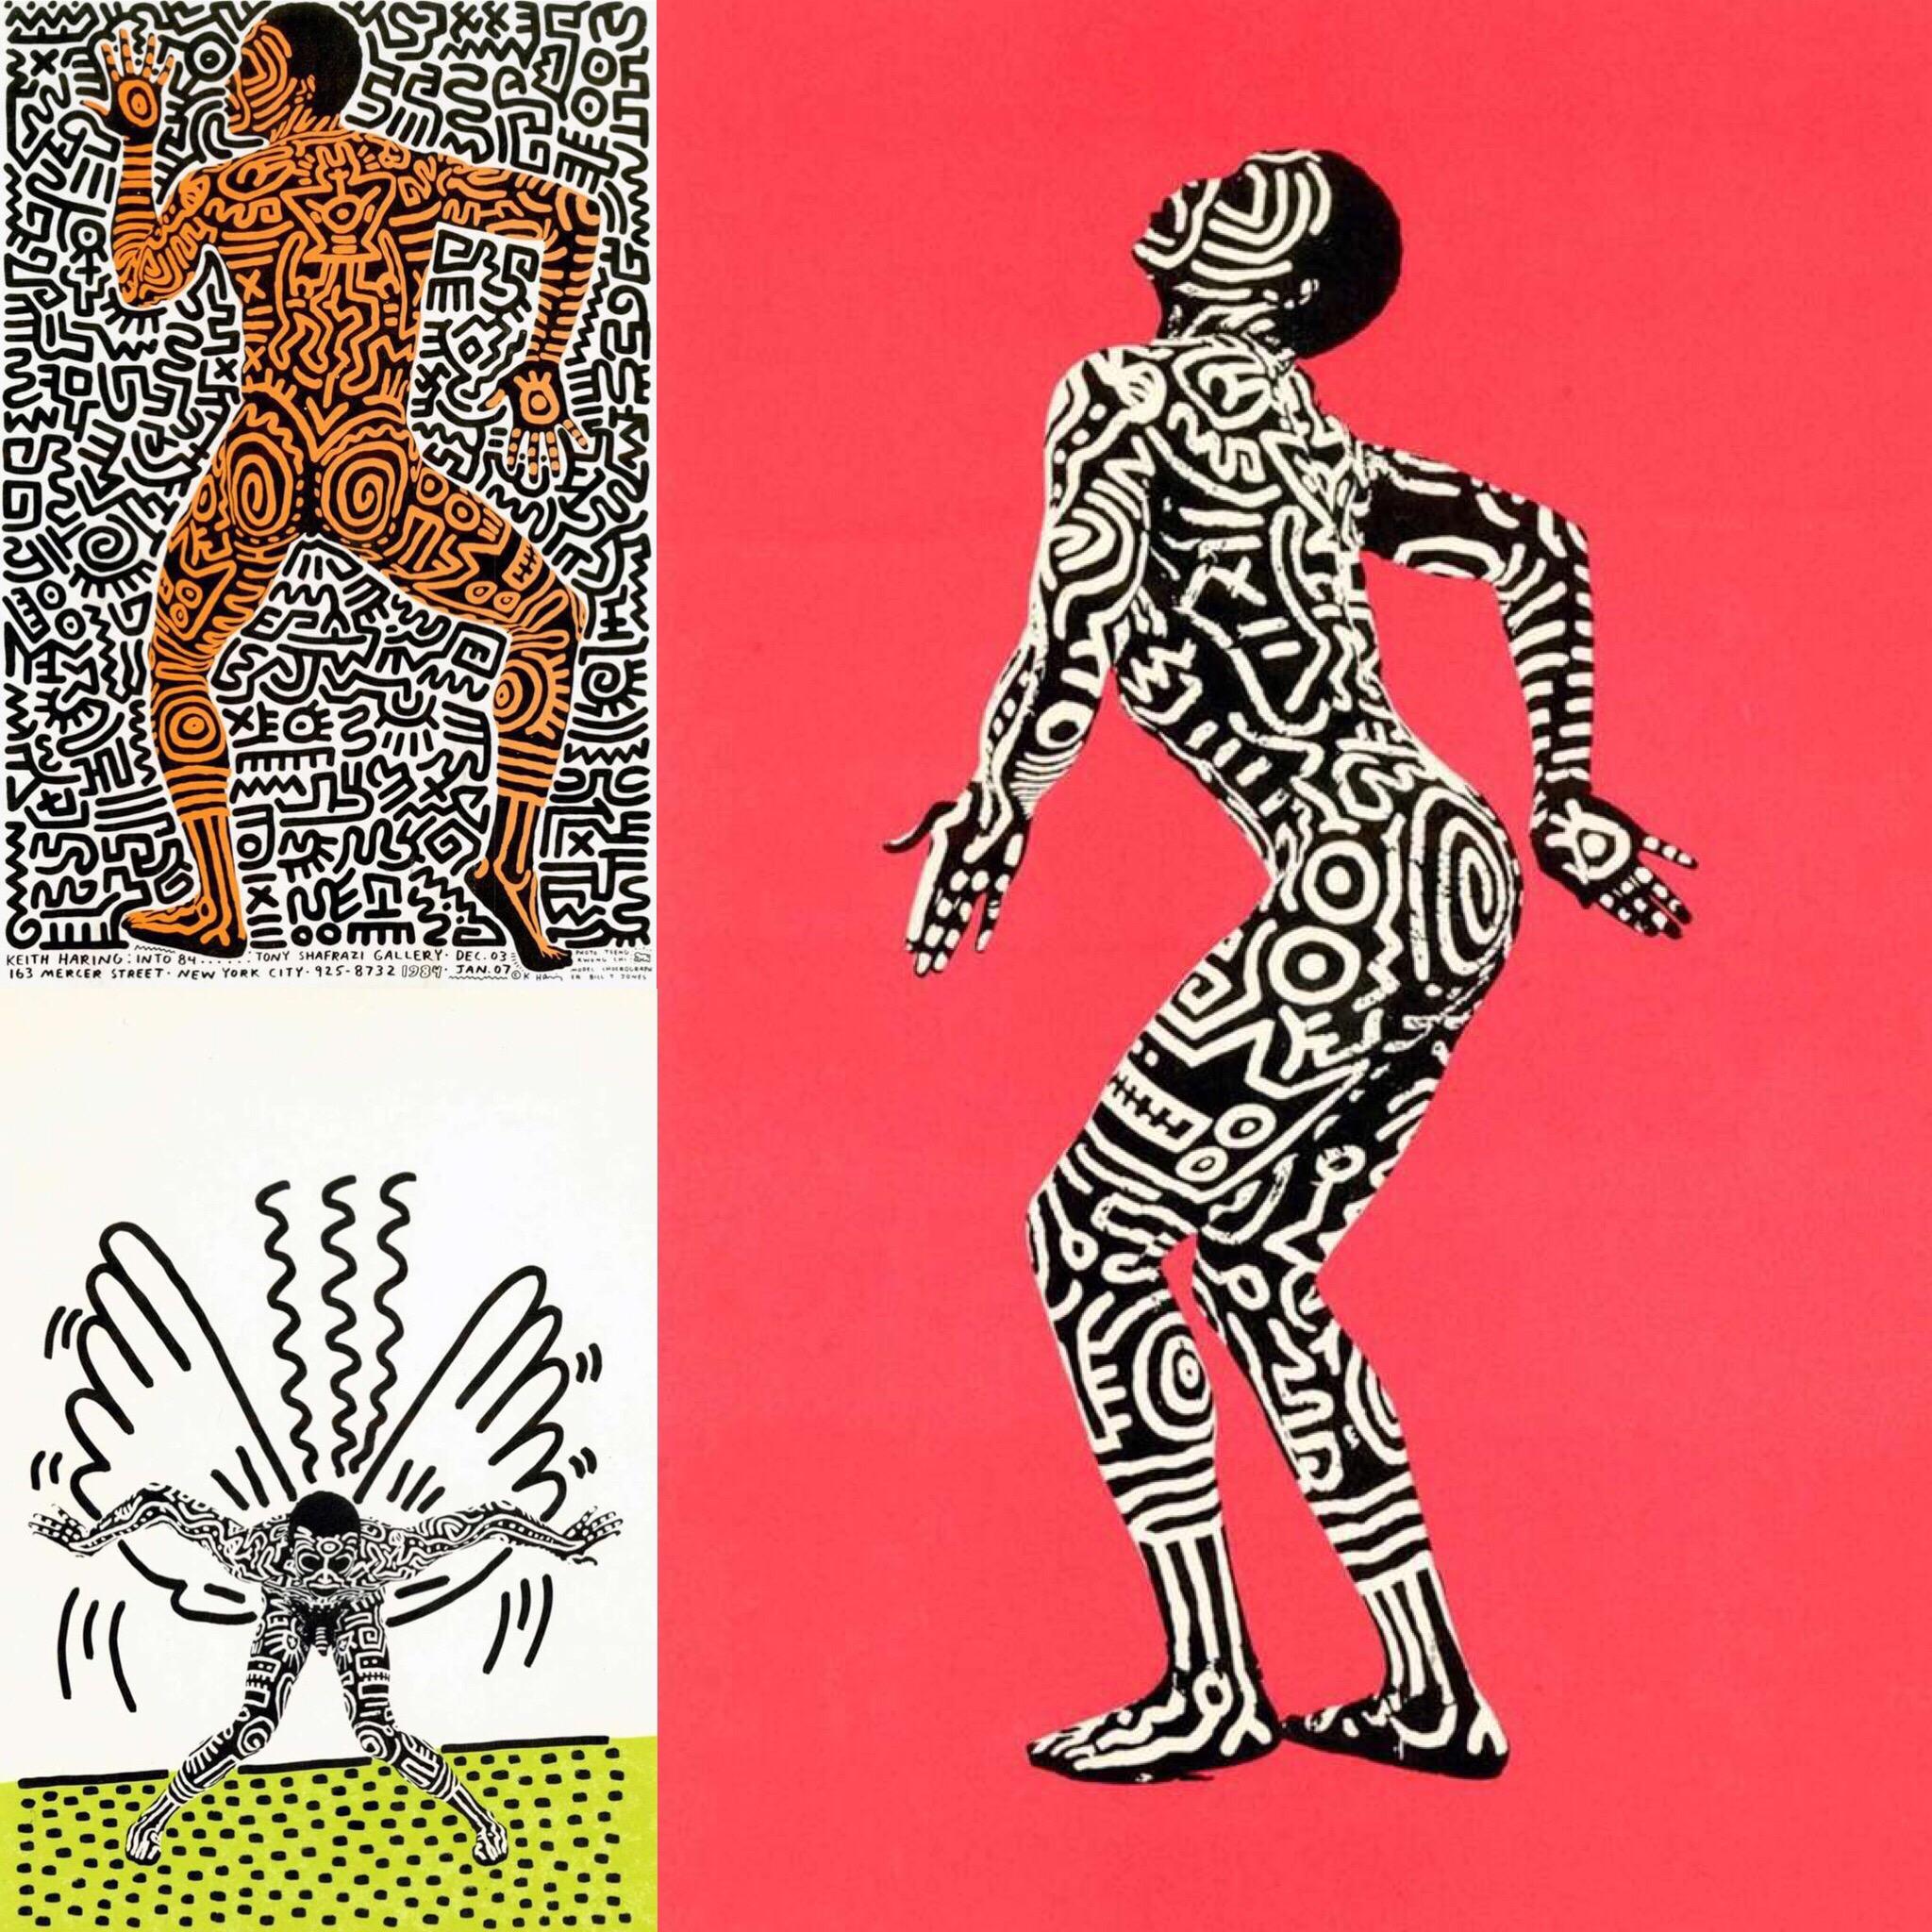 'Keith Haring Painted Man'/Keith Haring Into 84: 
A complete set of 3 announcement cards for Keith Haring’s well-documented exhibition, 'Into 84' at Tony Shafrazi Gallery, New York, 1983.  For this series Haring borrowed Jones' body — from head to